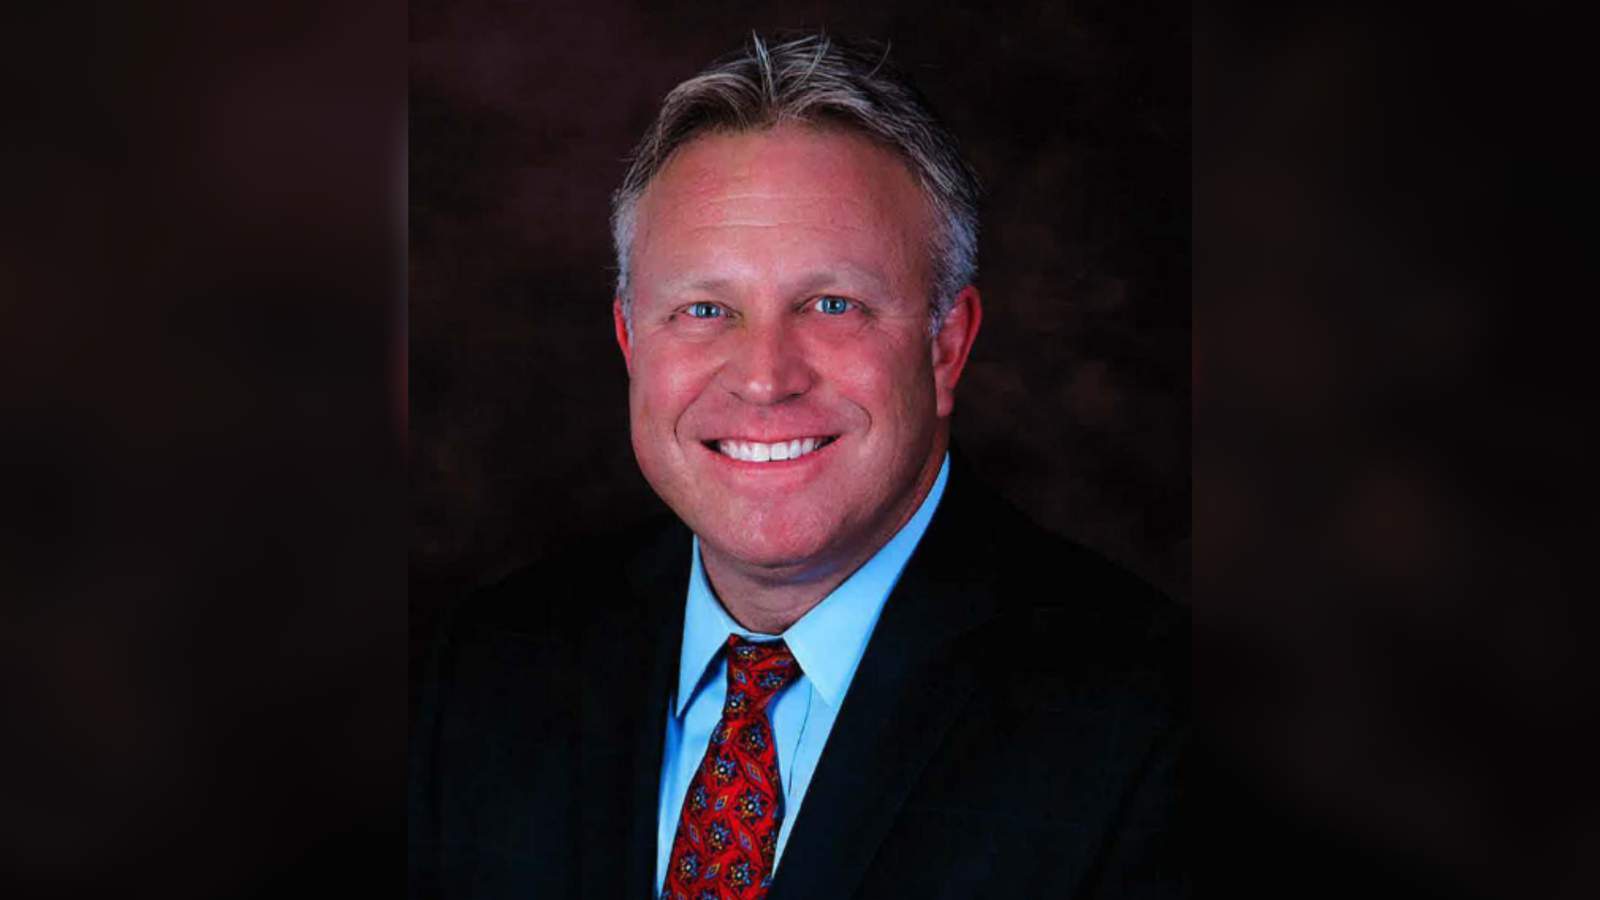 Tomball City Manager dies in single-vehicle crash in Waller County